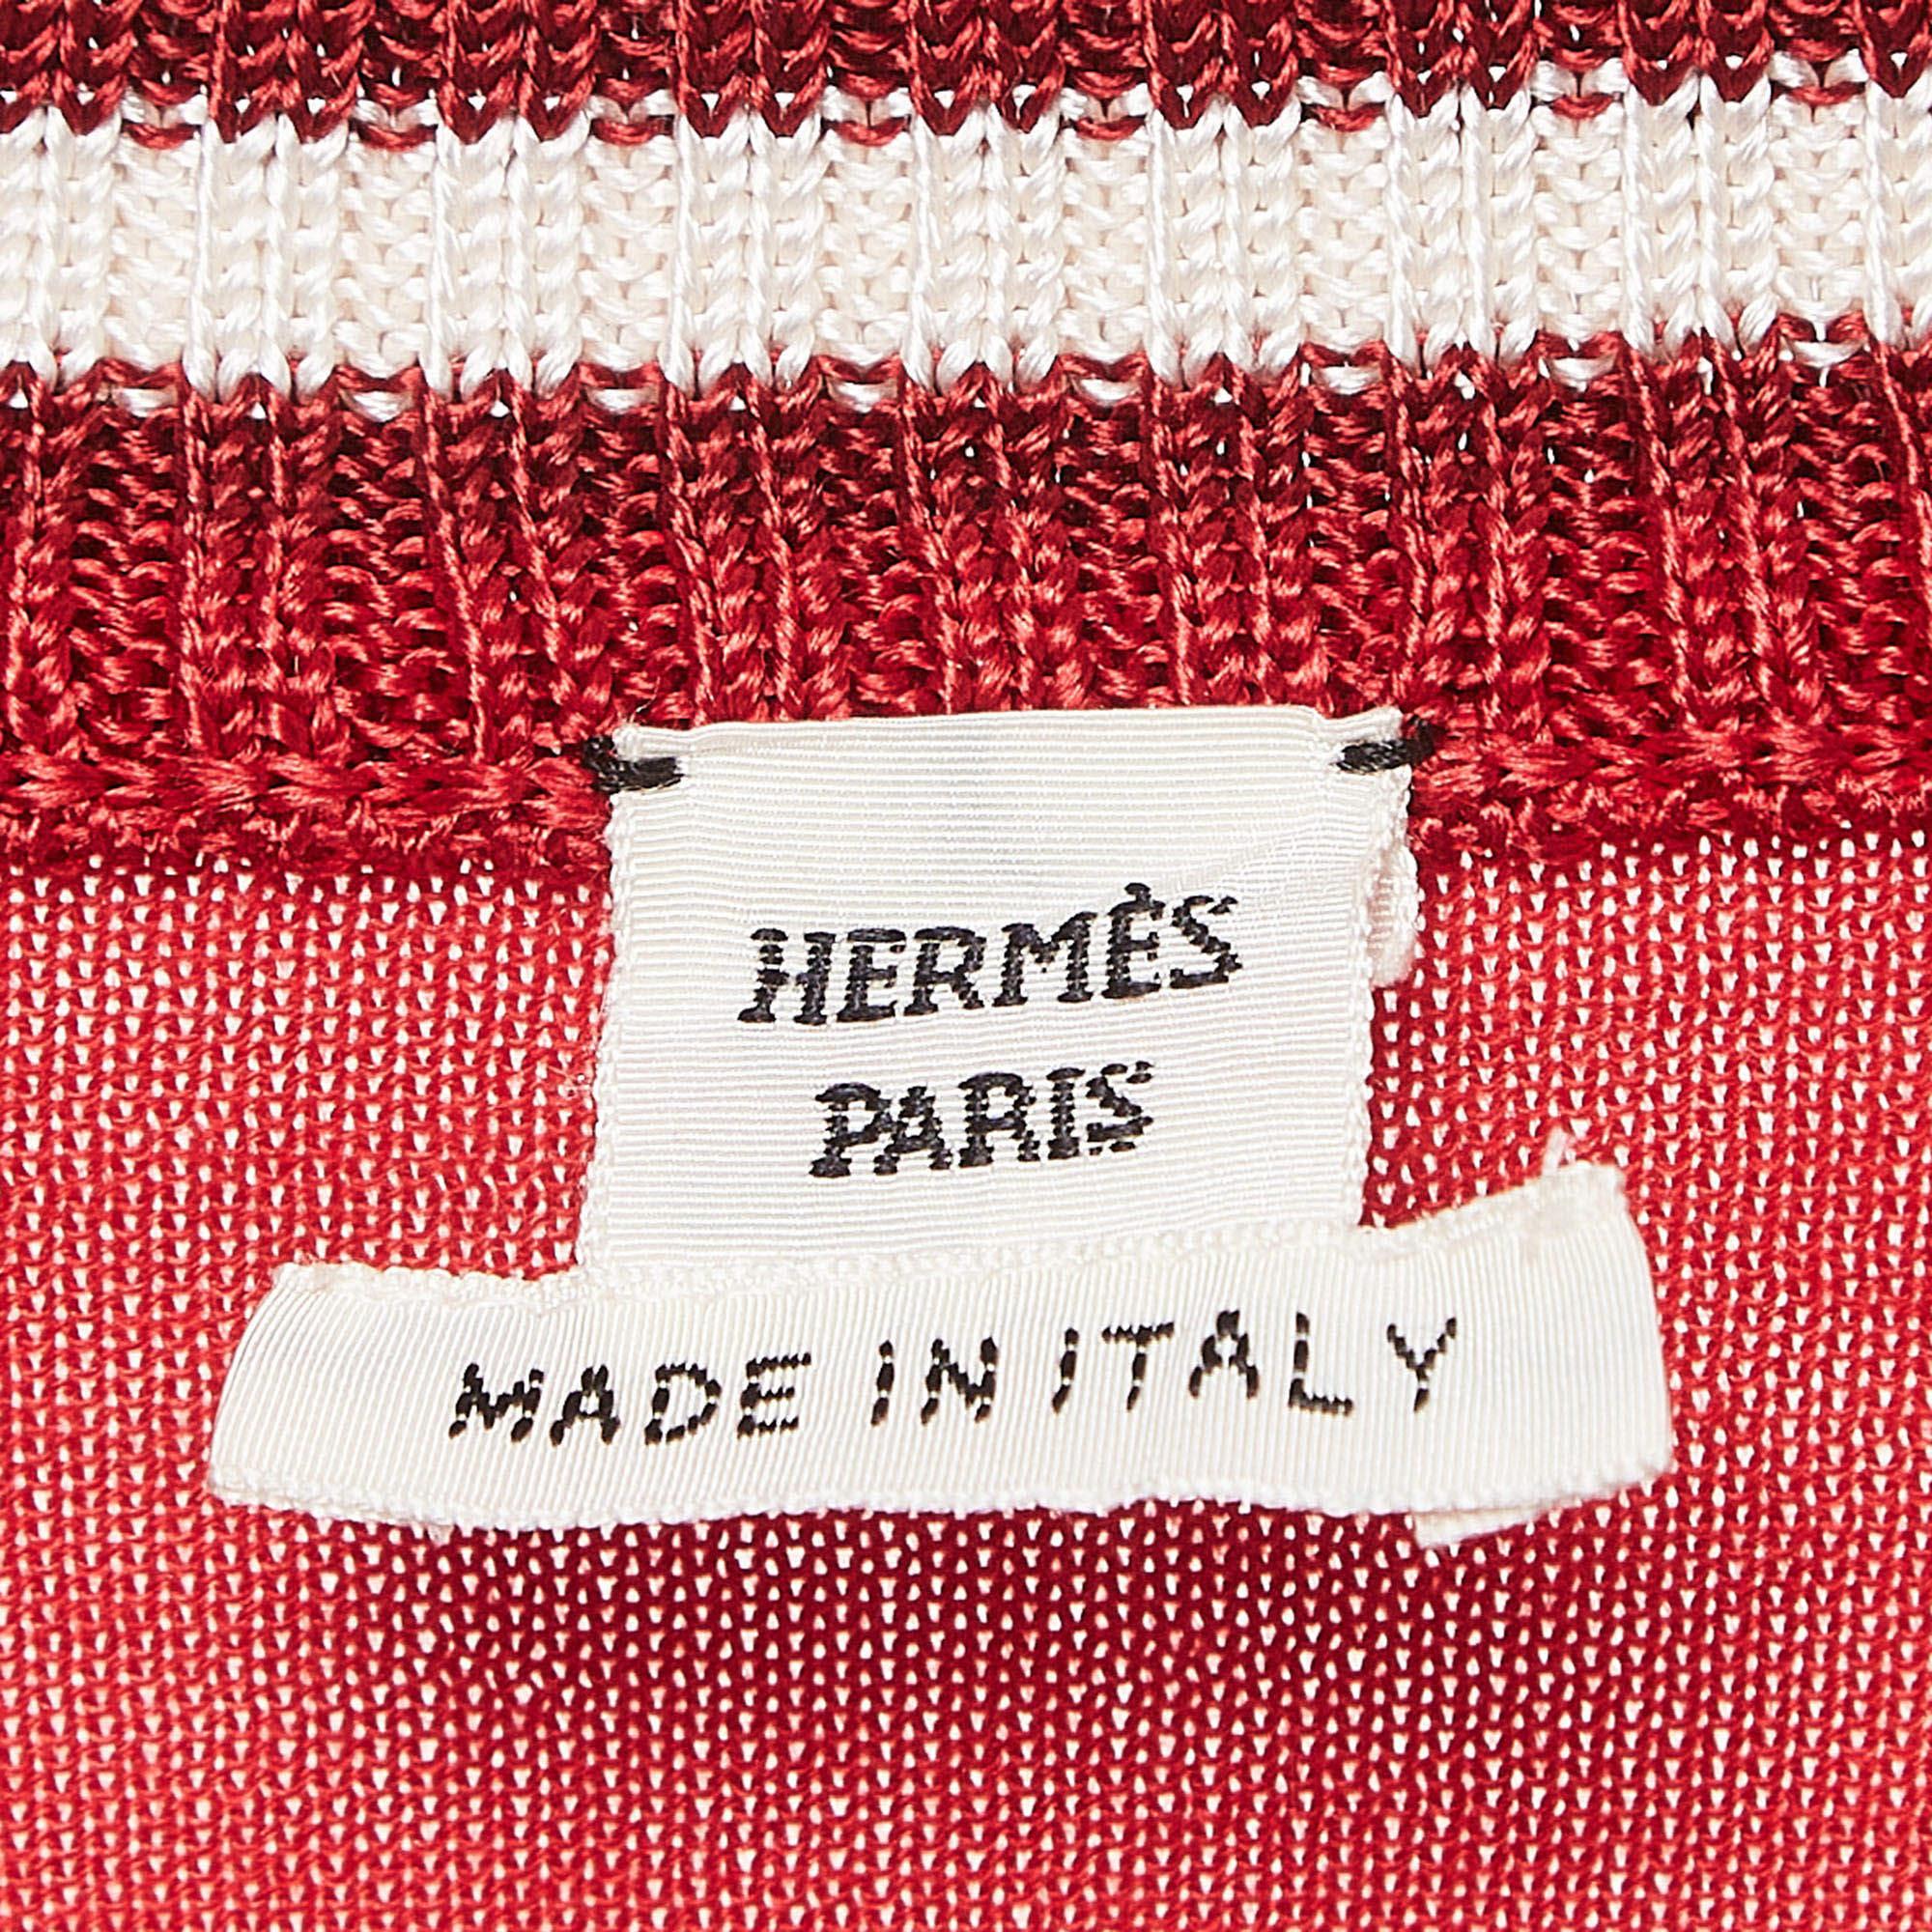  Hermès Red Textured Knit Chaines d' Ancre Zipper Top S 1